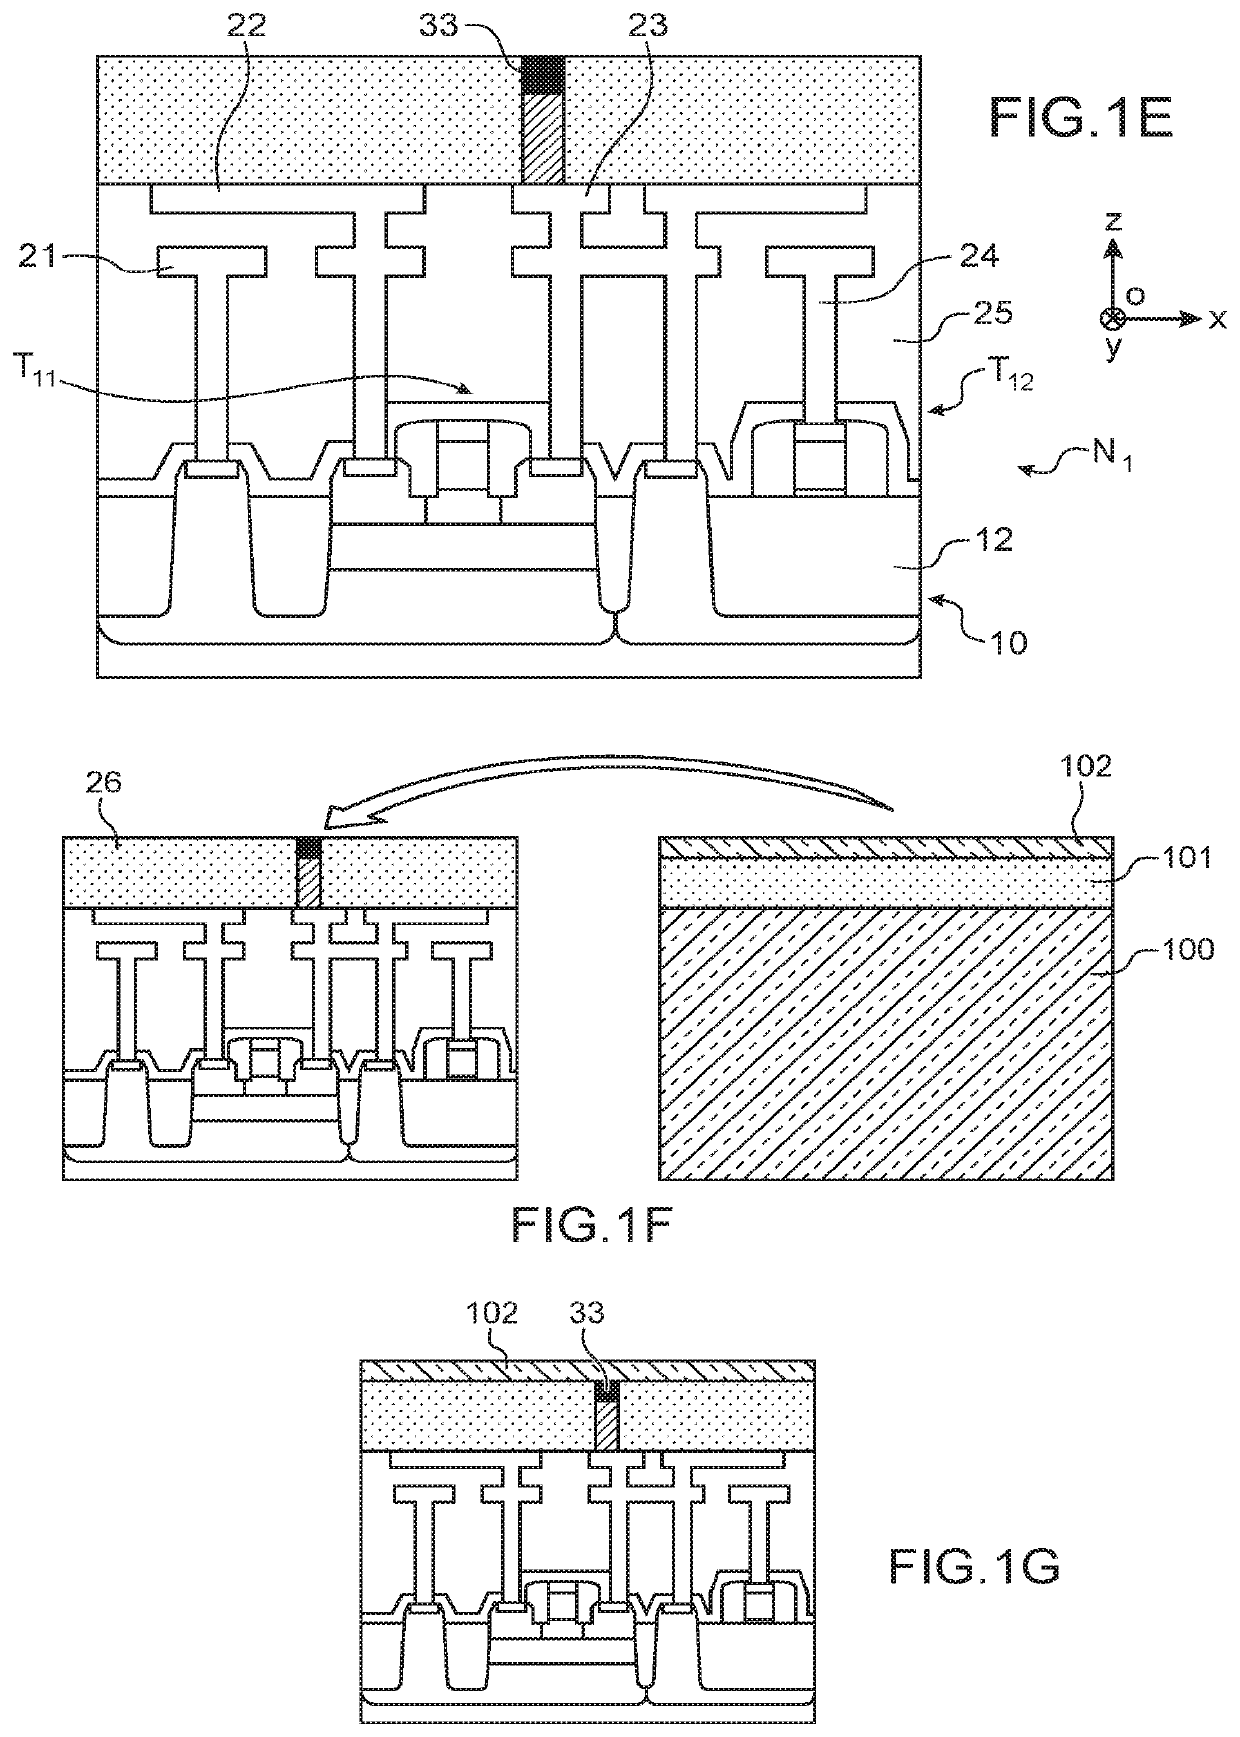 Internal via with improved contact for upper semi-conductor layer of a 3D circuit